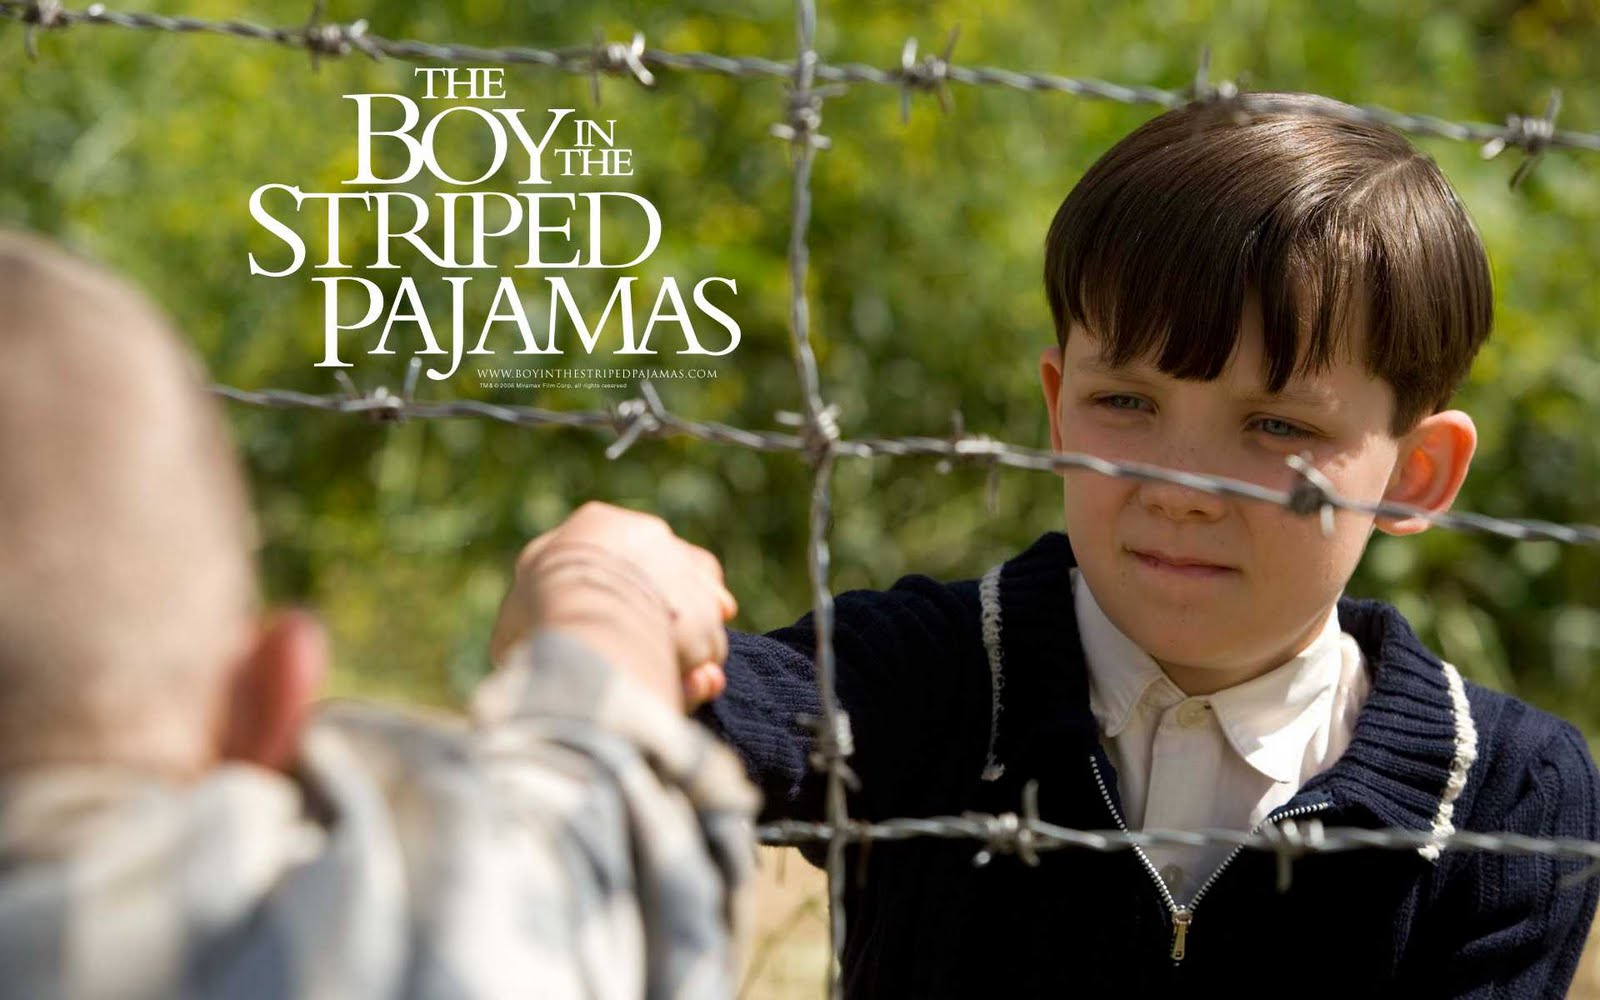 The Film Corner with Greg Klymkiw: THE BOY IN THE STRIPED PAJAMAS ...